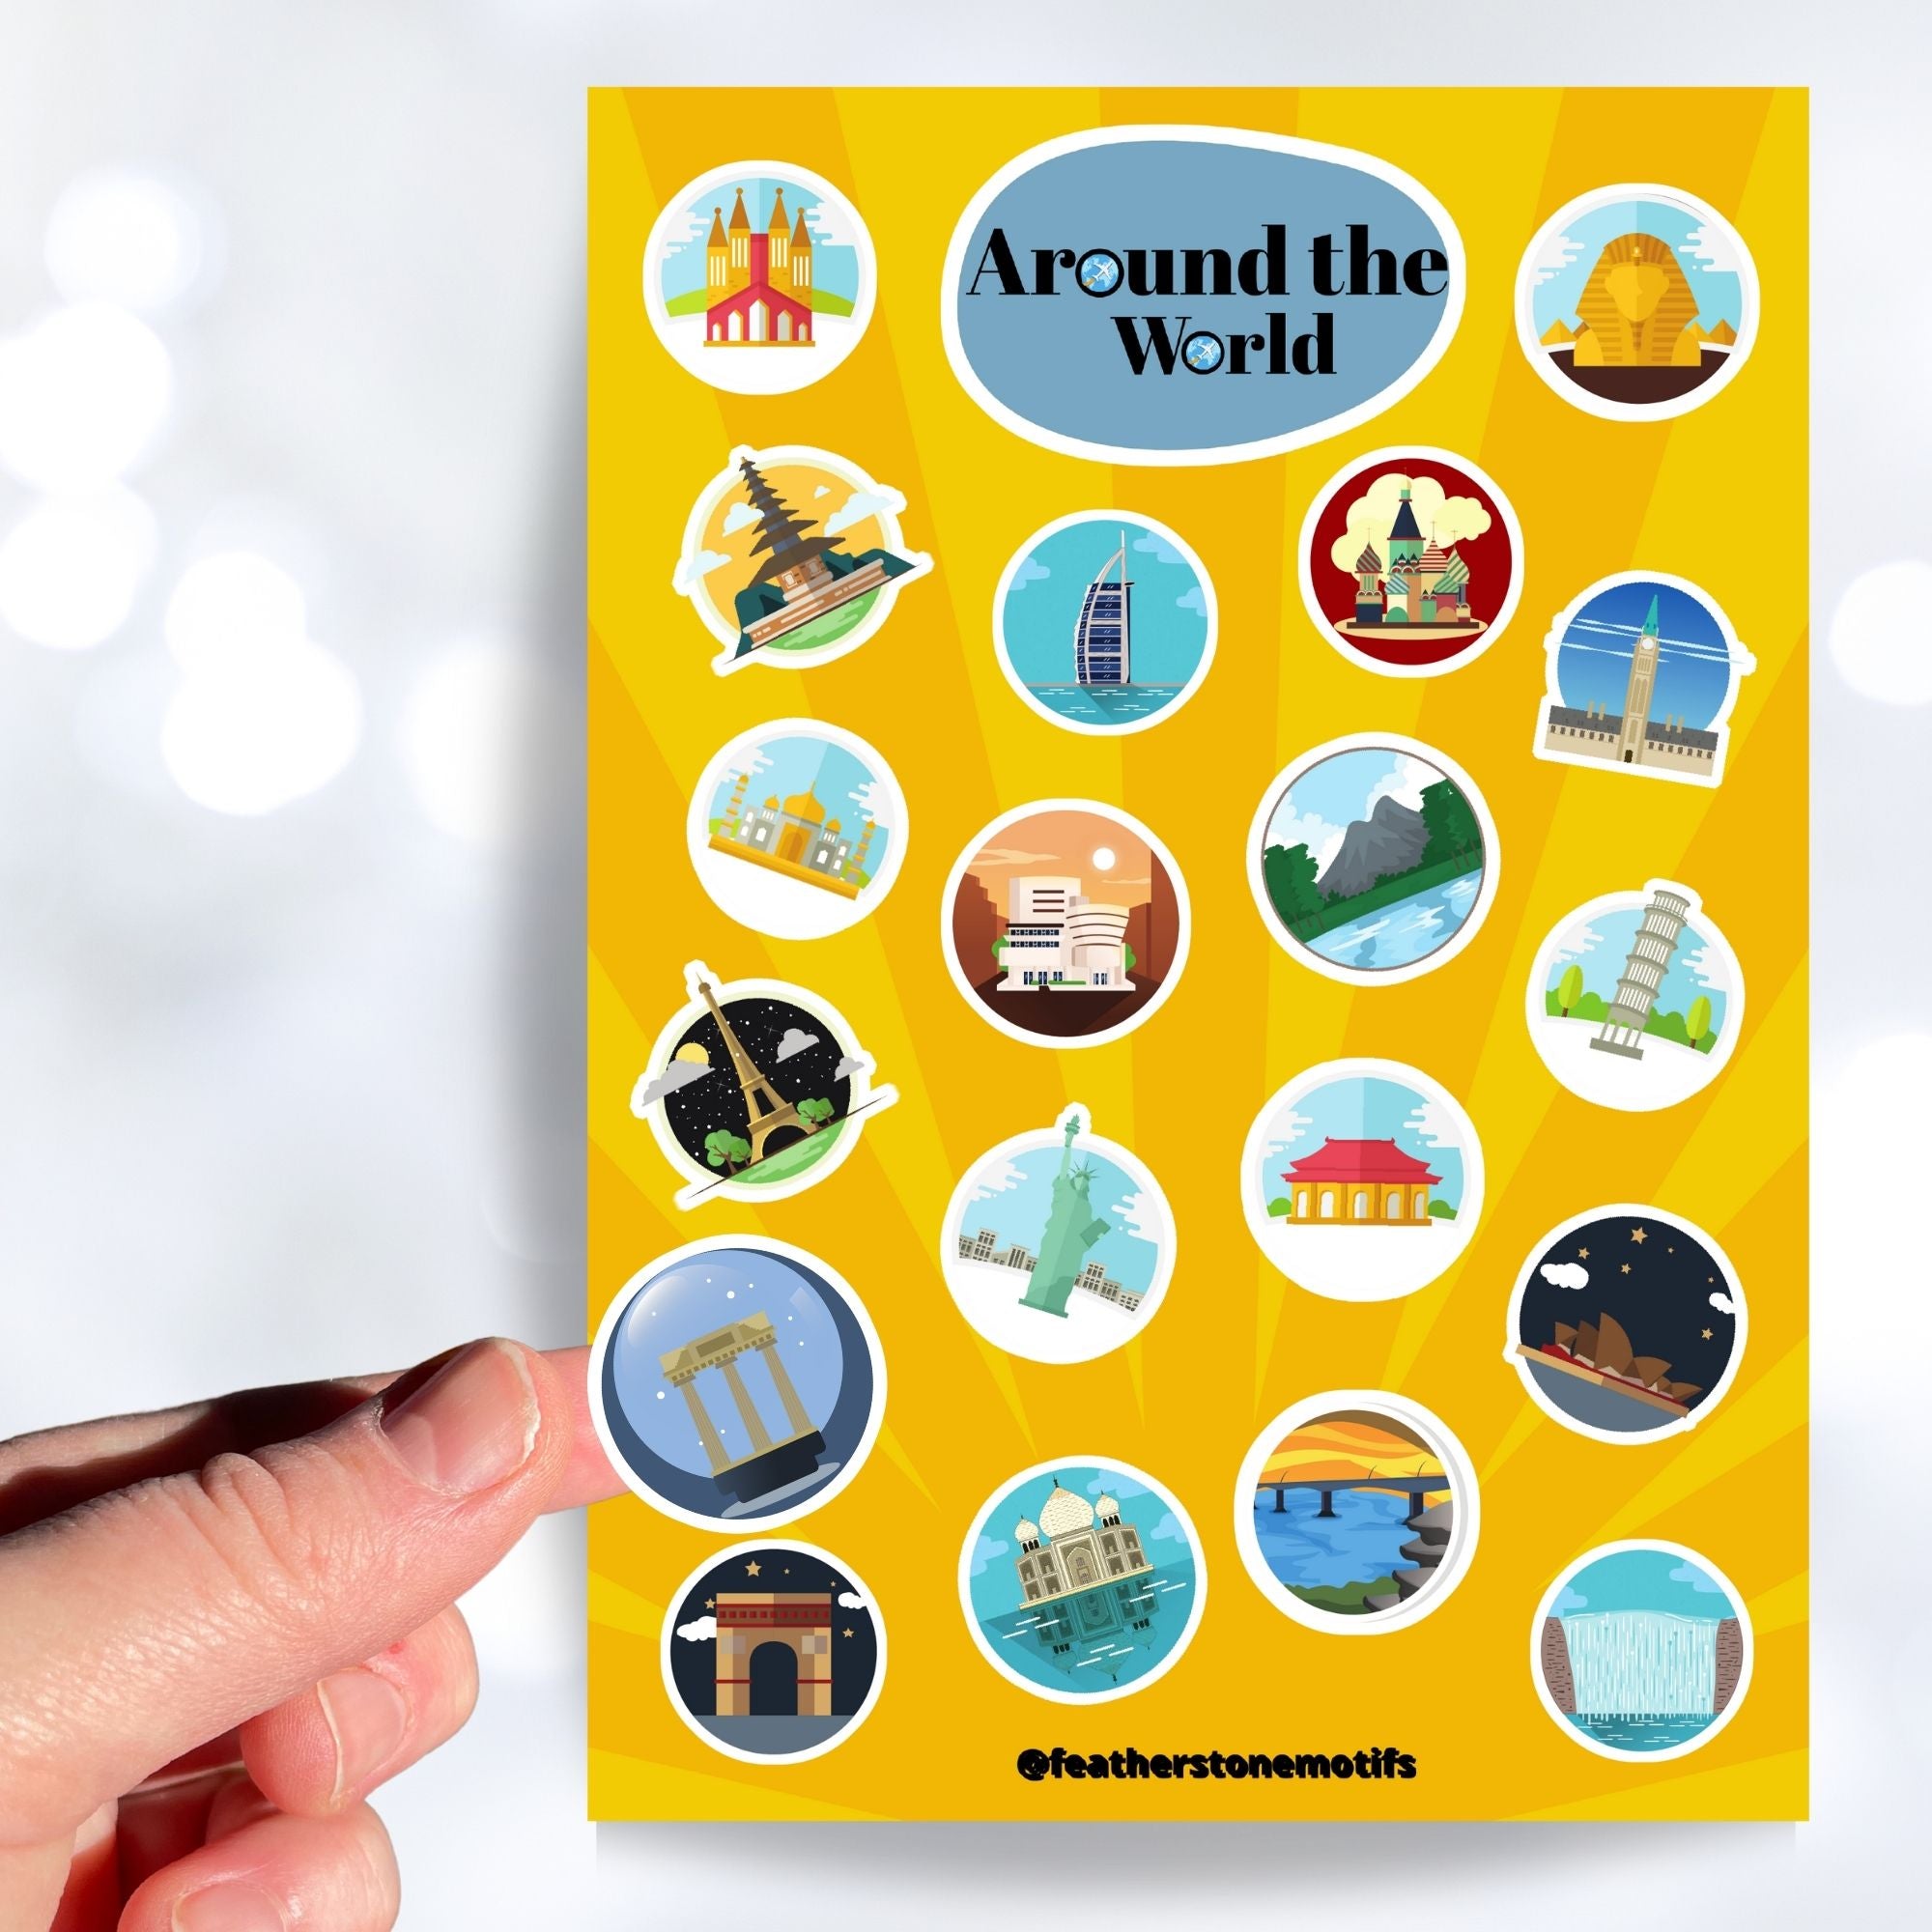 Our Around the World sticker sheet collection has sticker images of iconic travel destinations! This sheet has a yellow background with 20 different stickers. This image shows a hand holding a sticker of ancient ruins with a night starry background above the sticker sheet.